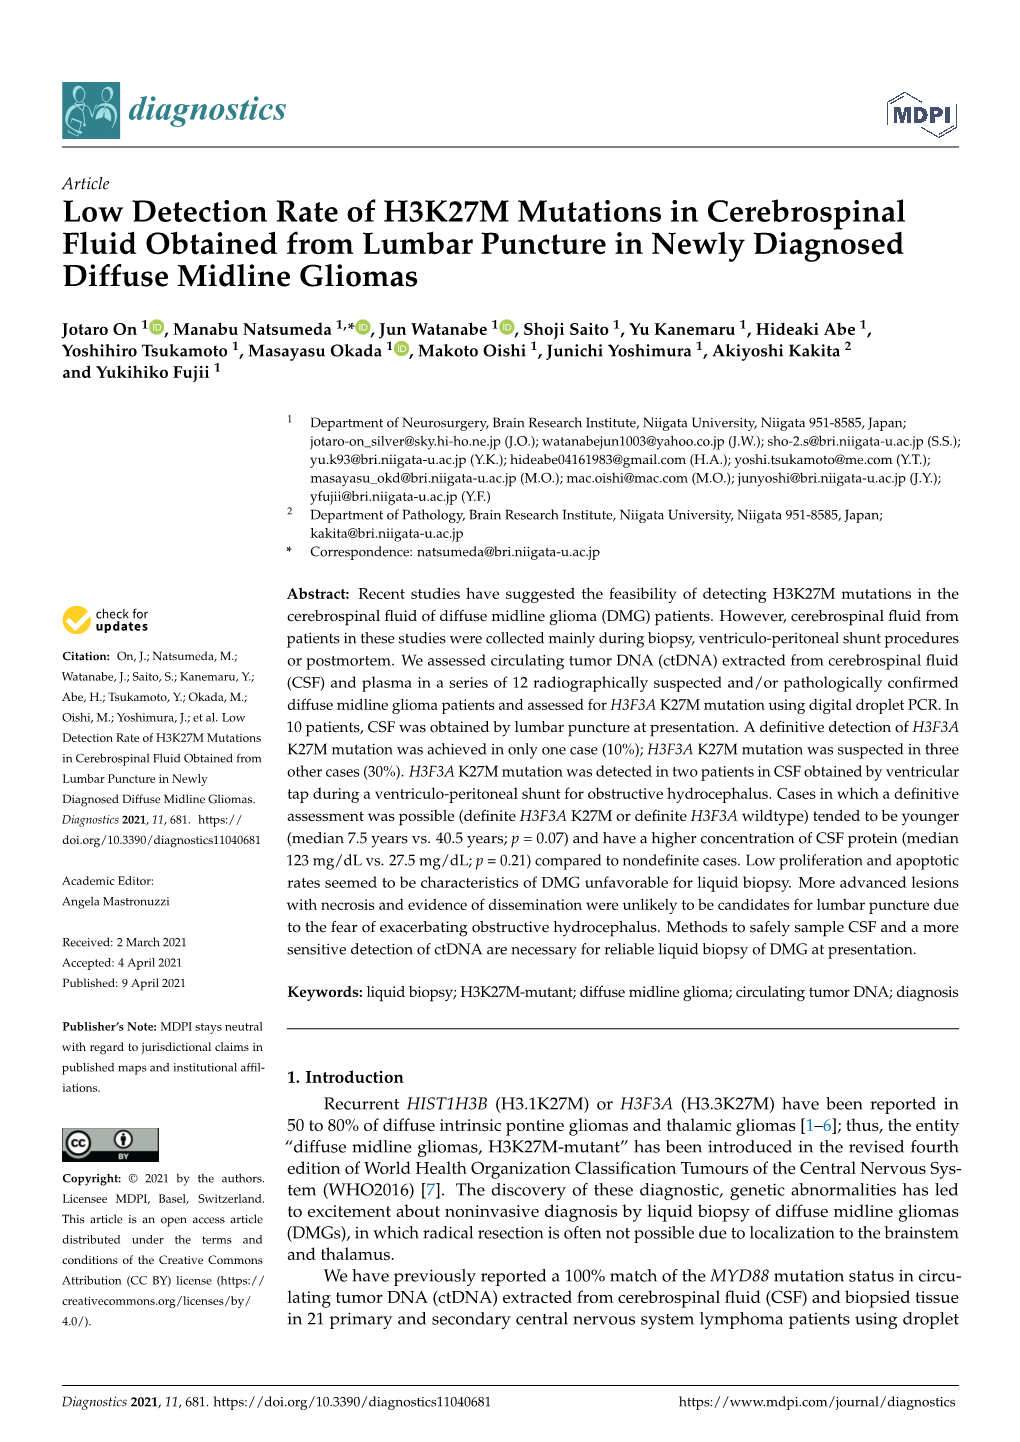 Low Detection Rate of H3K27M Mutations in Cerebrospinal Fluid Obtained from Lumbar Puncture in Newly Diagnosed Diffuse Midline Gliomas